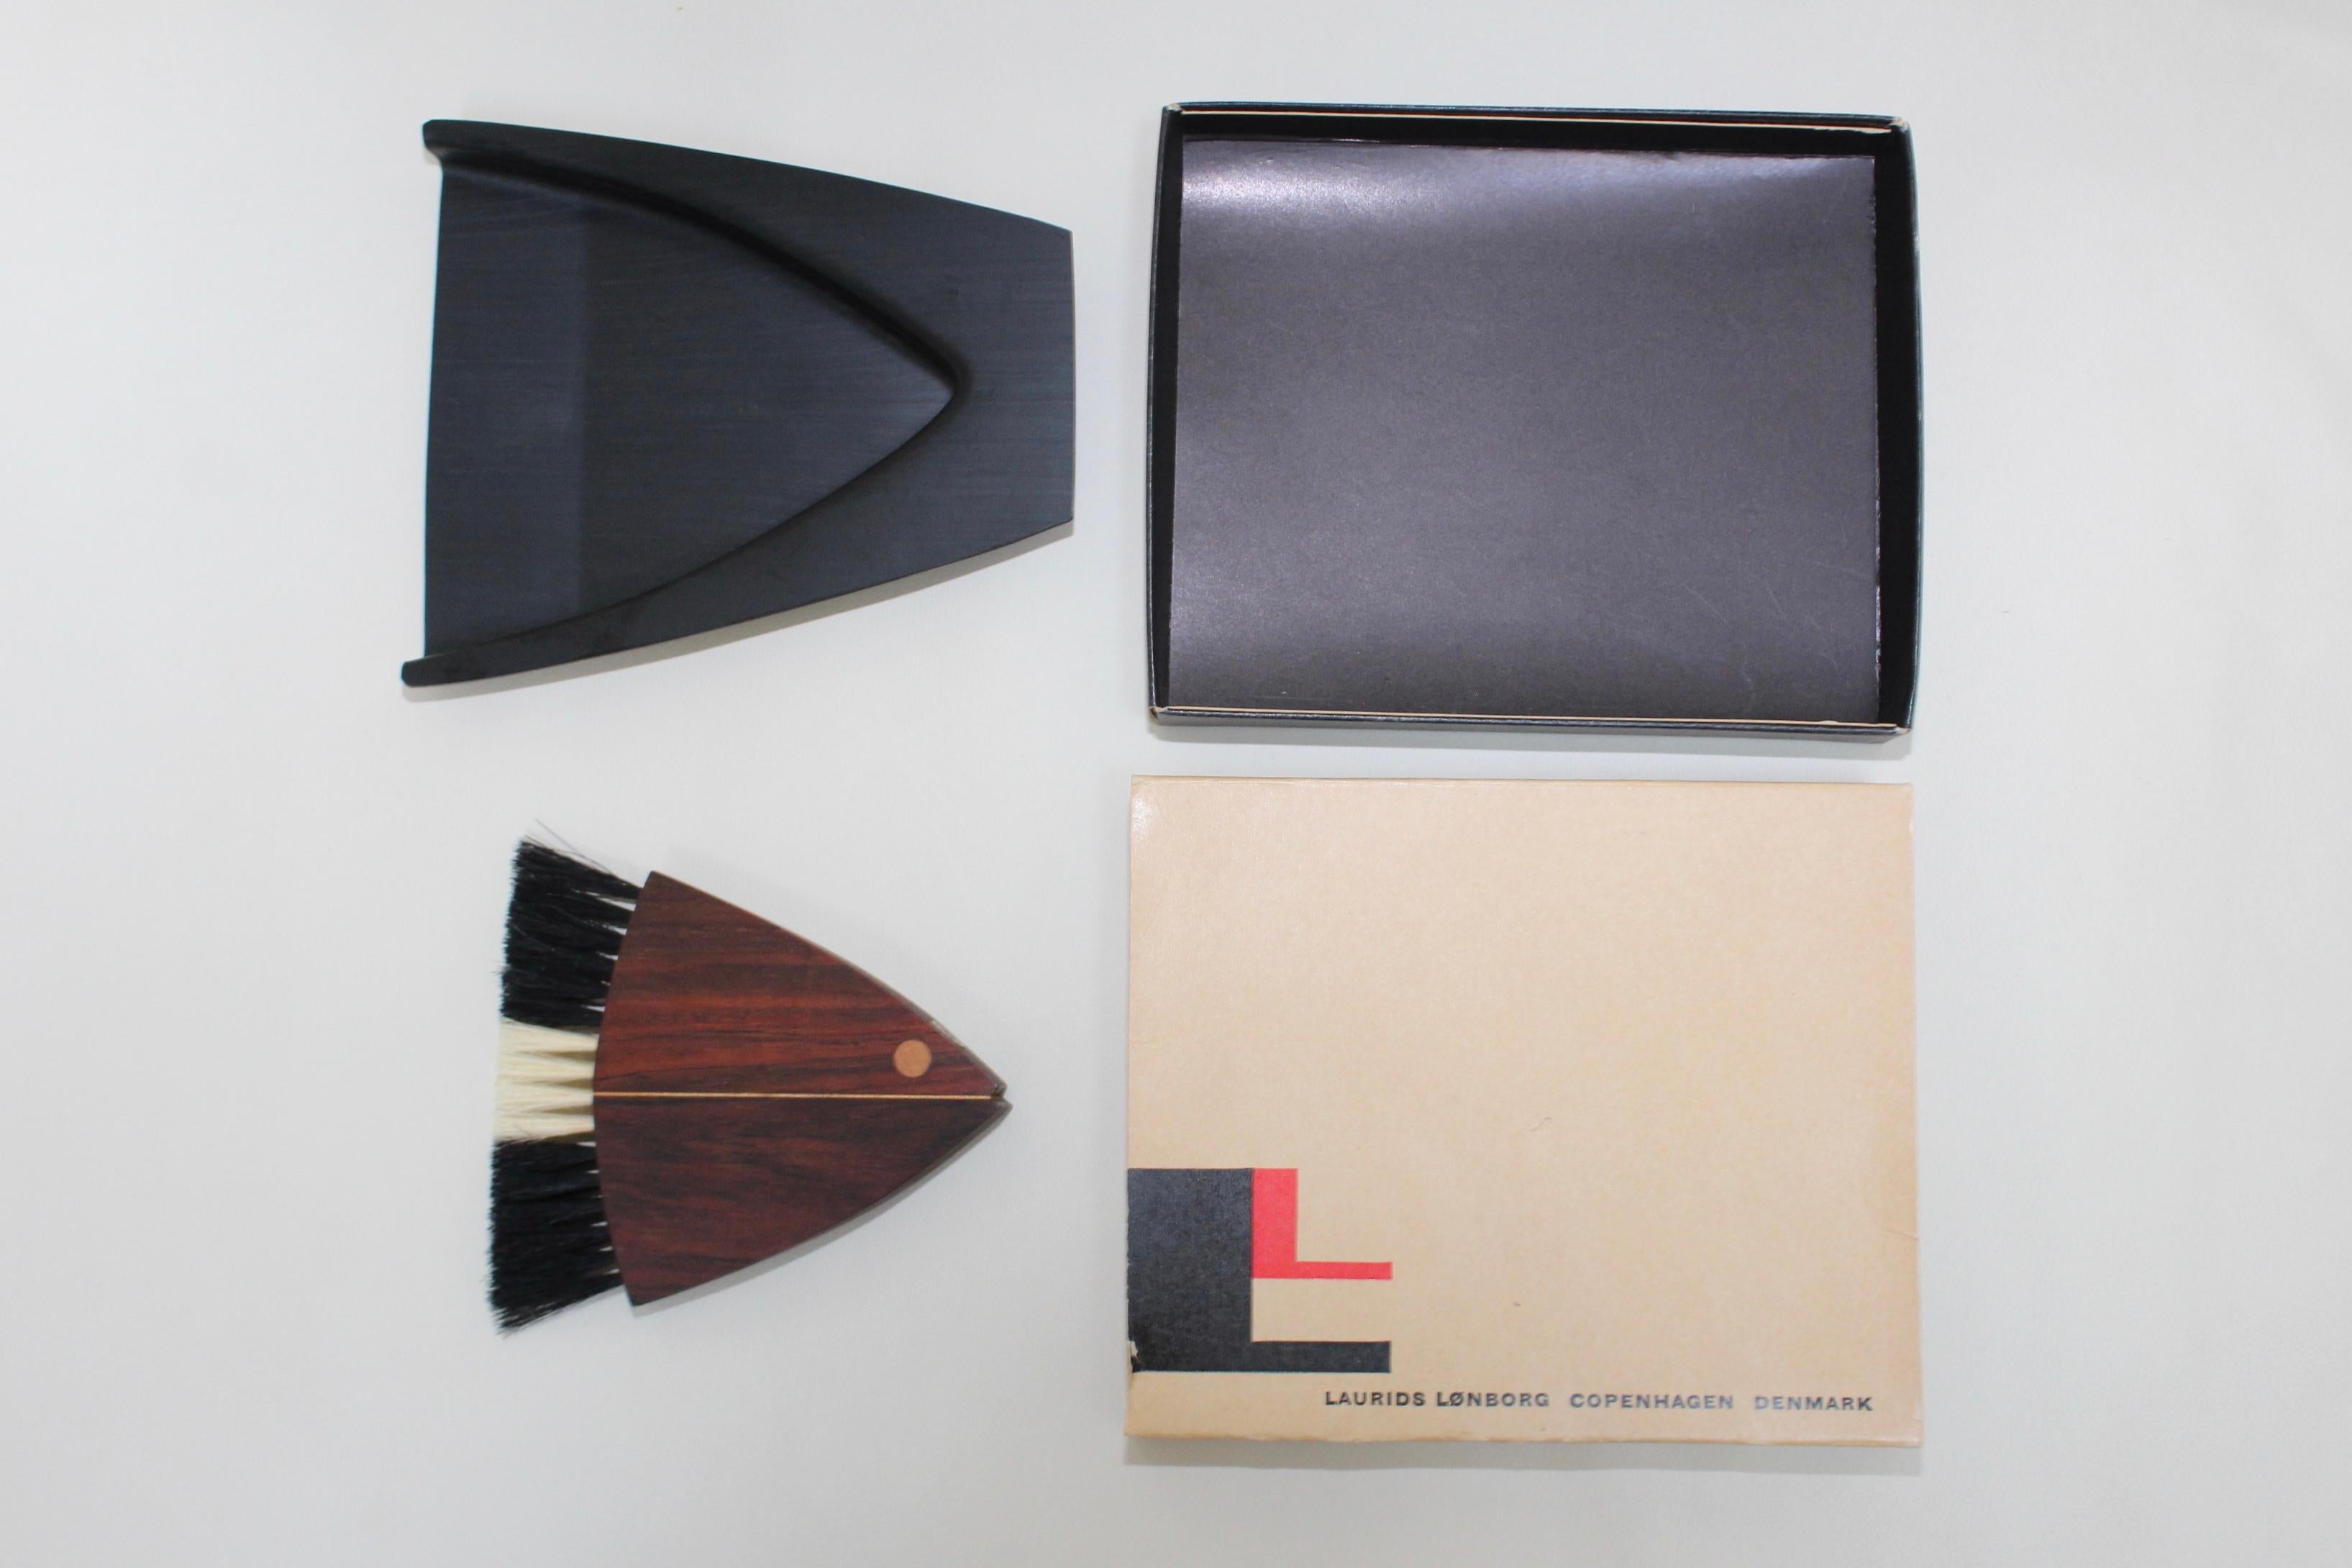 1960s Mid-Century Modern rosewood fish crumb sweeper designed by Laurids Lonborg. In excellent vintage condition with the original box.